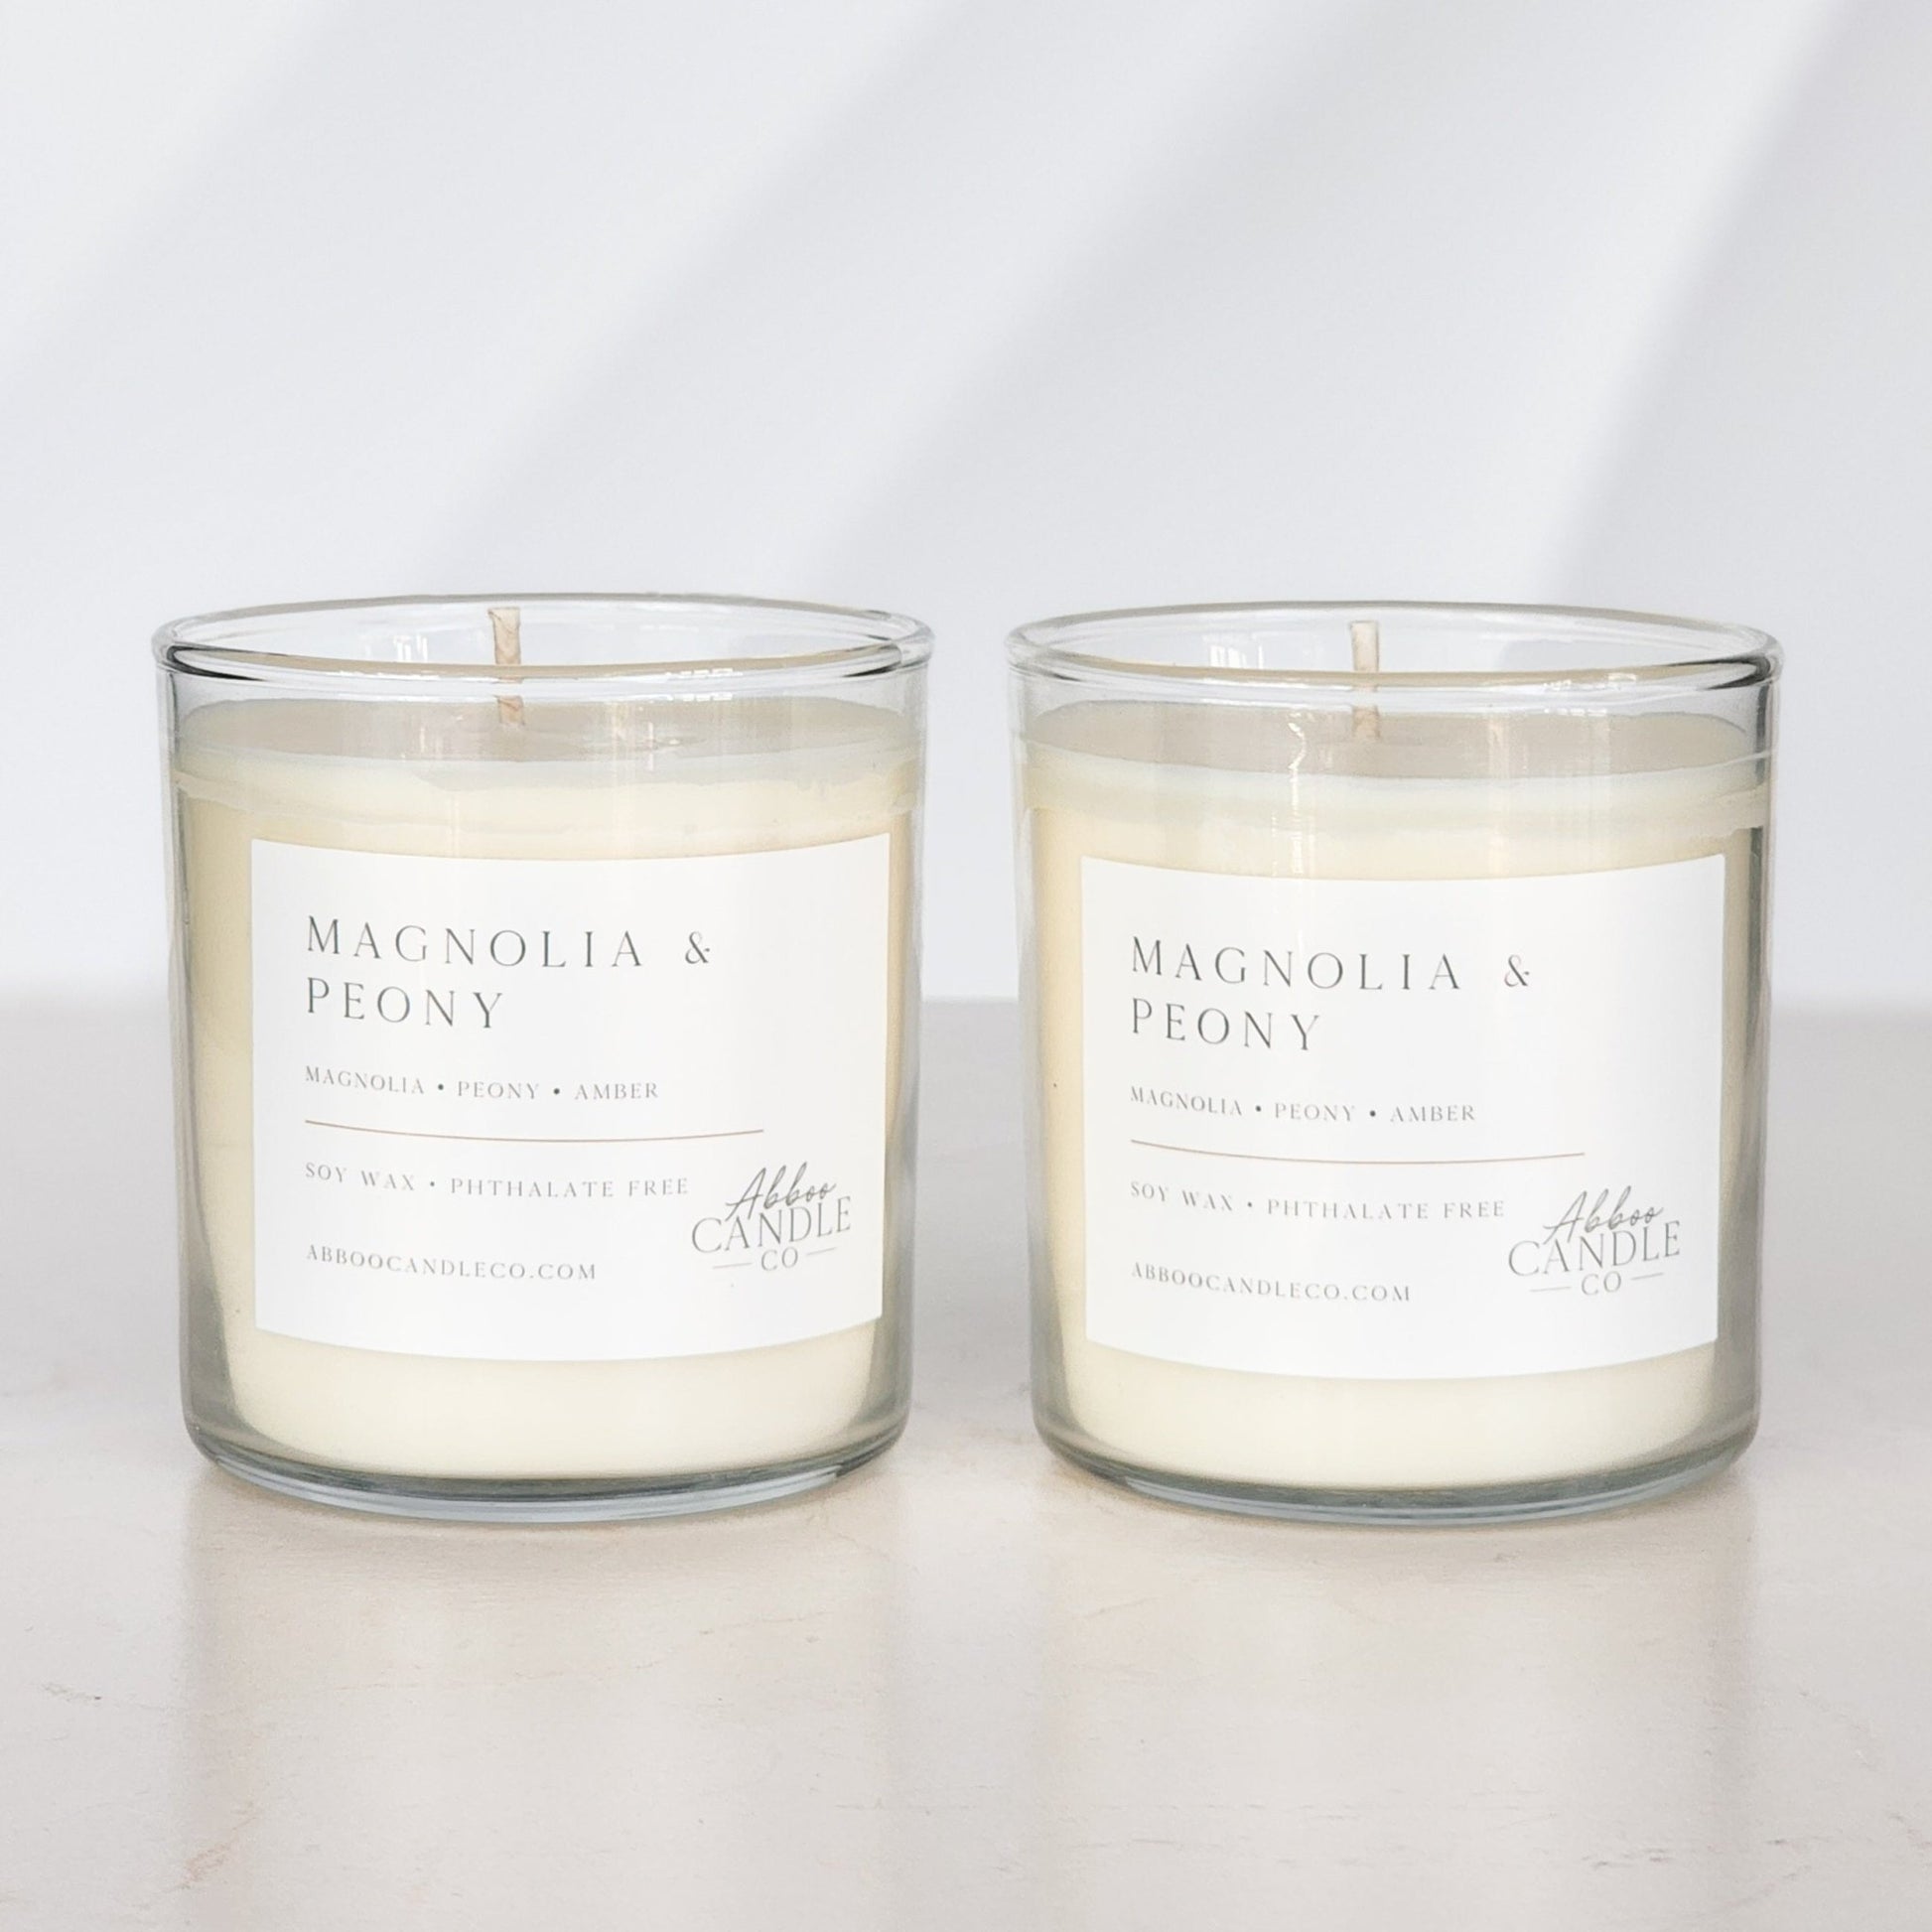 Magnolia and Peony Soy Candle Bundle - Abboo Candle Co